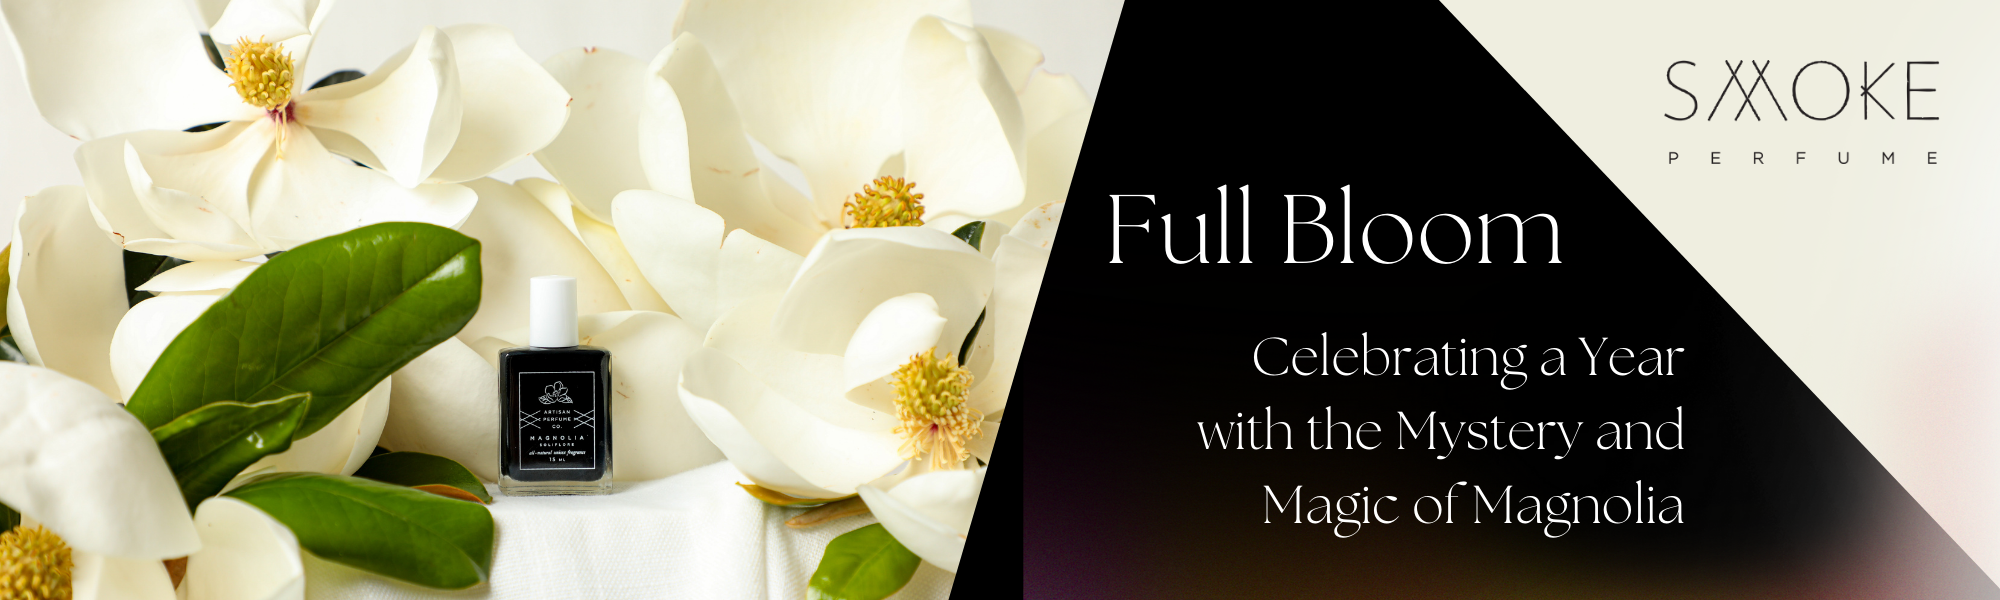 Full Bloom: Celebrating a Year with the Mystery and Magic of Magnolia